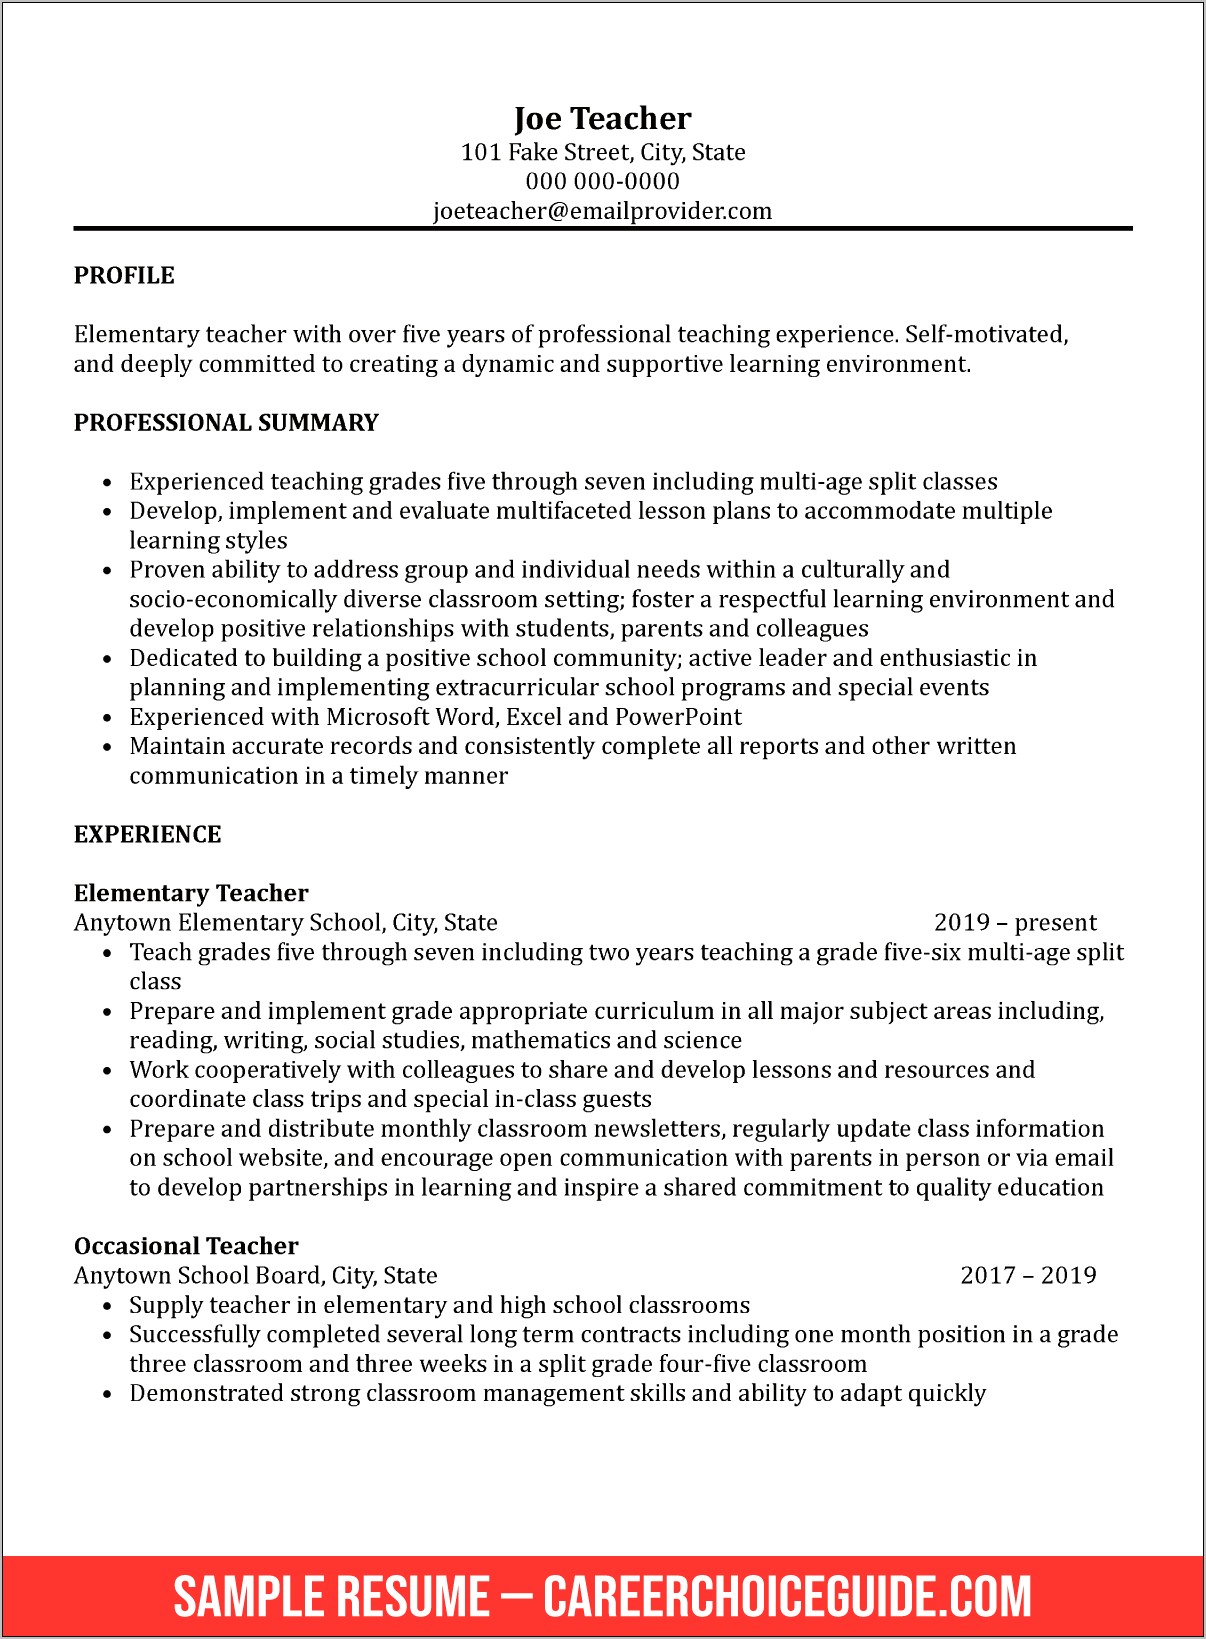 Resume Professional Summary For Multiple Jobs